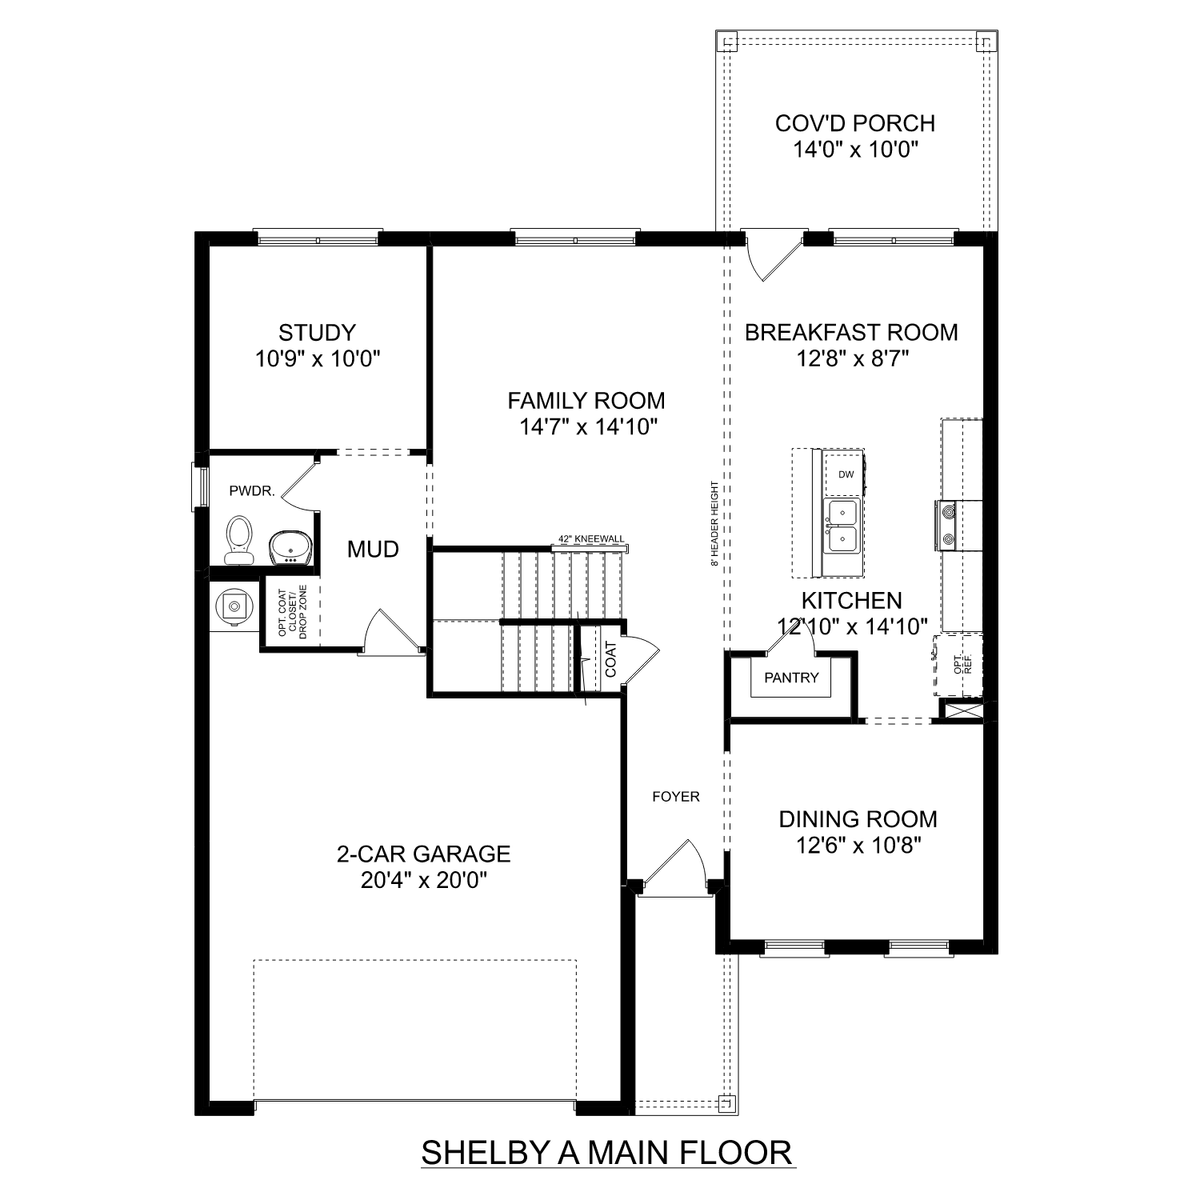 1 - The Shelby A buildable floor plan layout in Davidson Homes' Old Stone community.